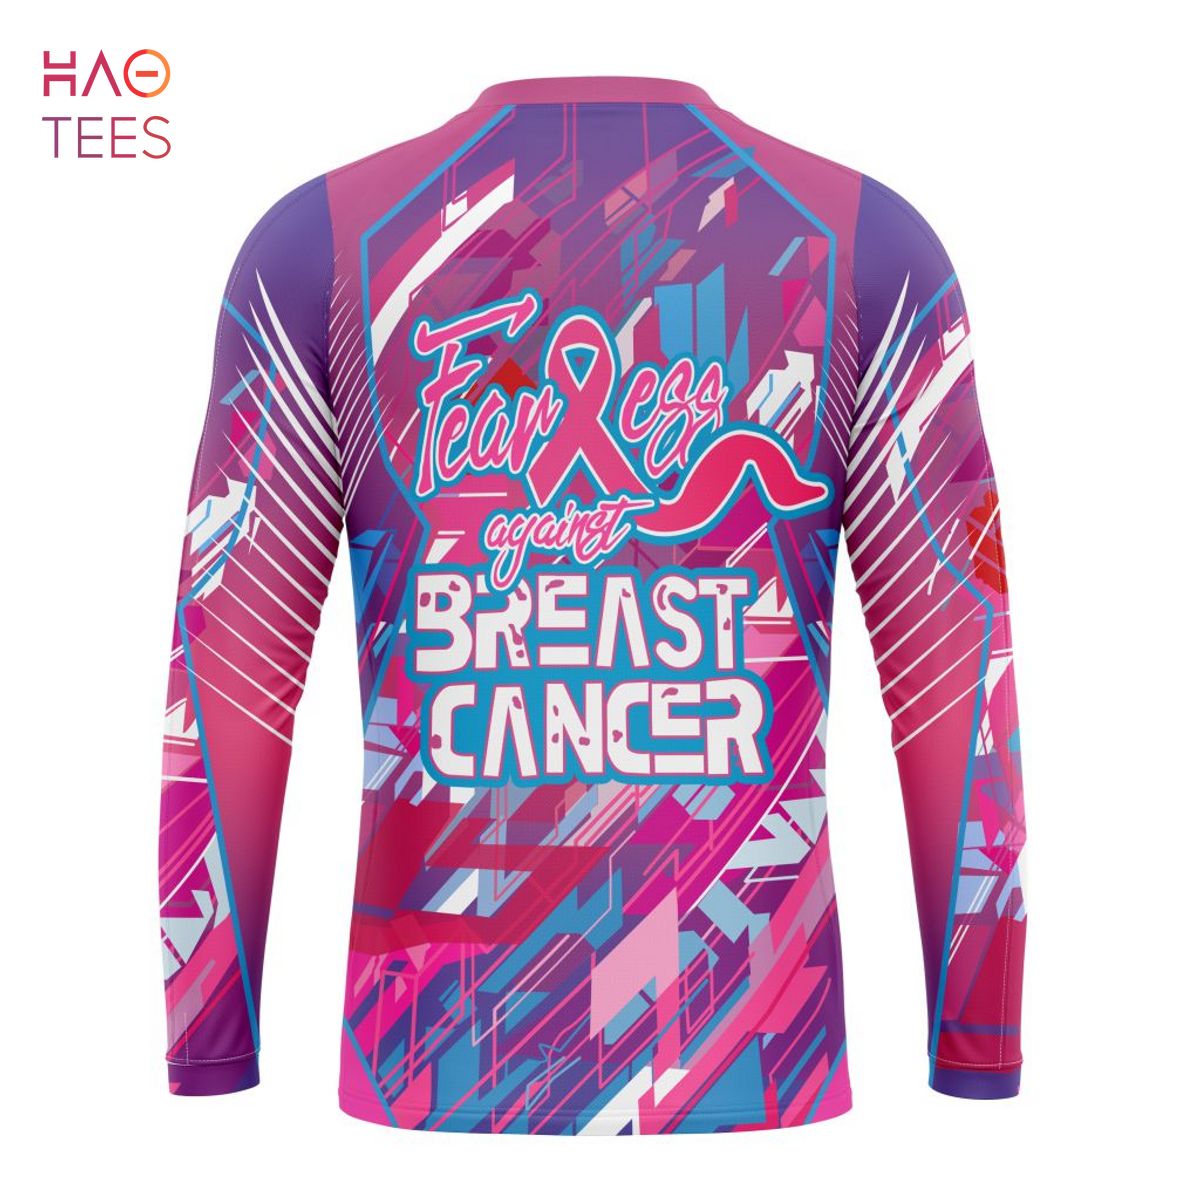 BEST NFL Tampa Bay Buccaneers, Specialized Design I Pink I Can! Fearless Again Breast Cancer 3D Hoodie